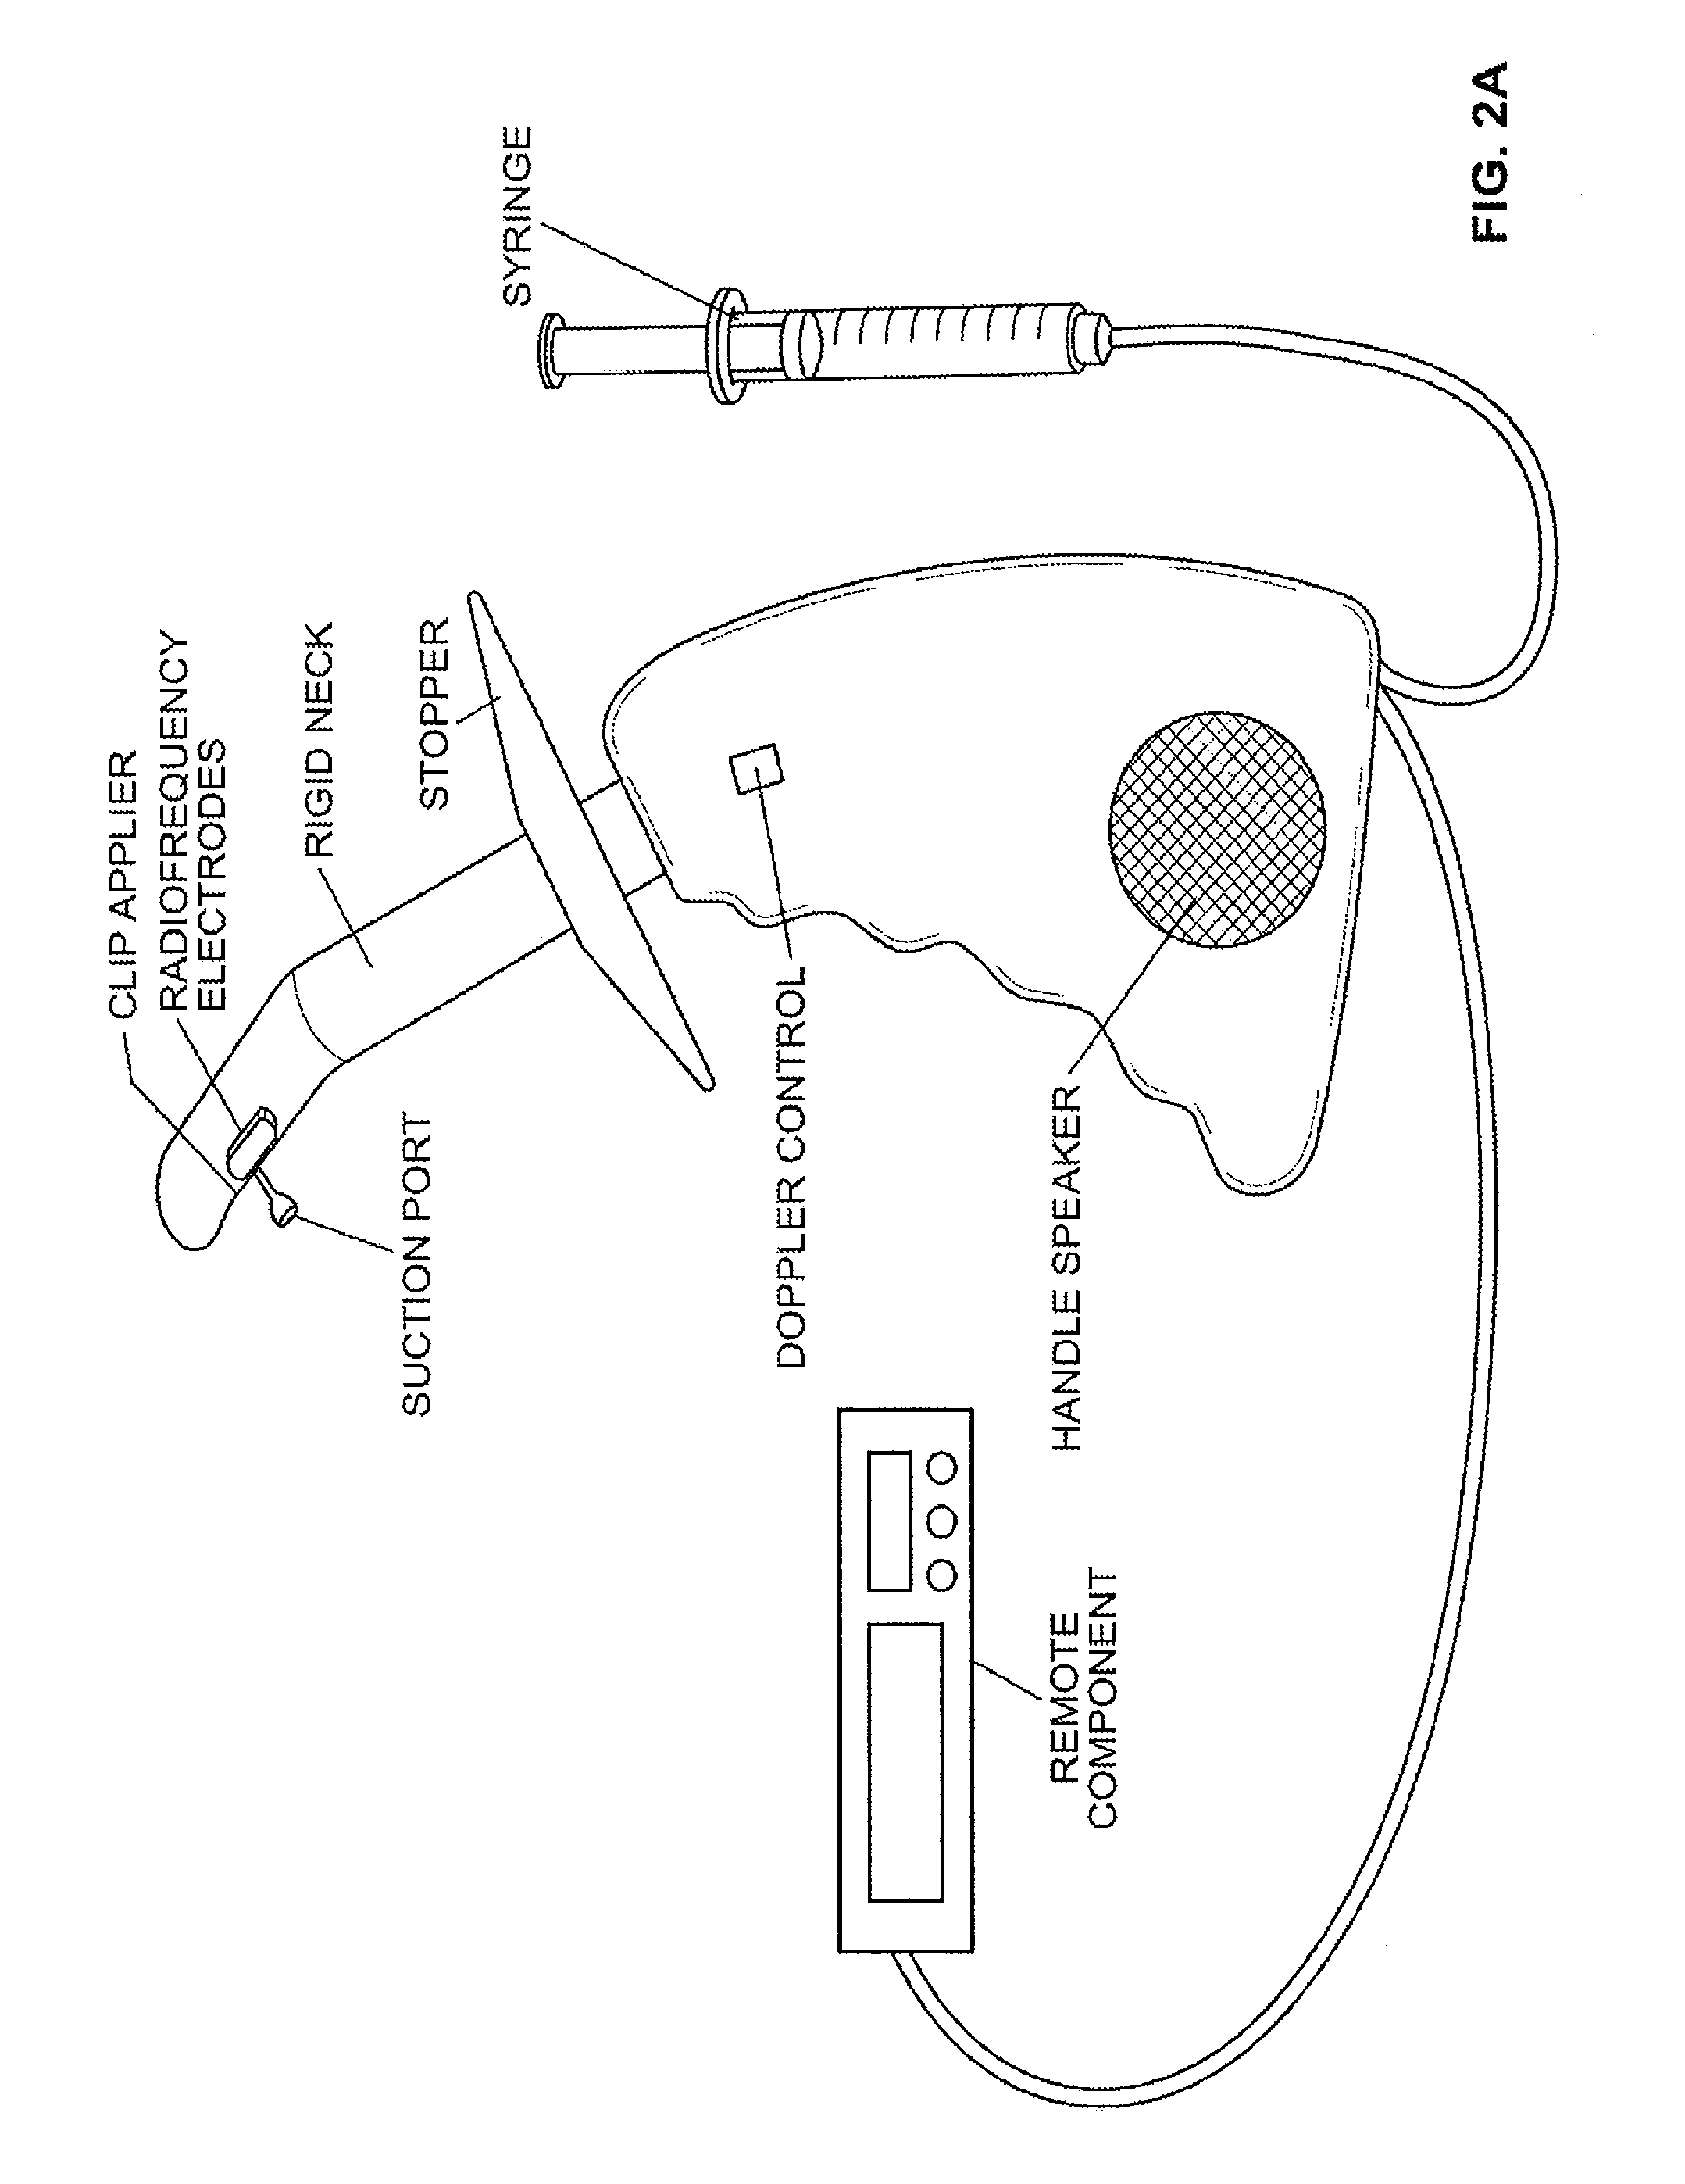 Closure device and method